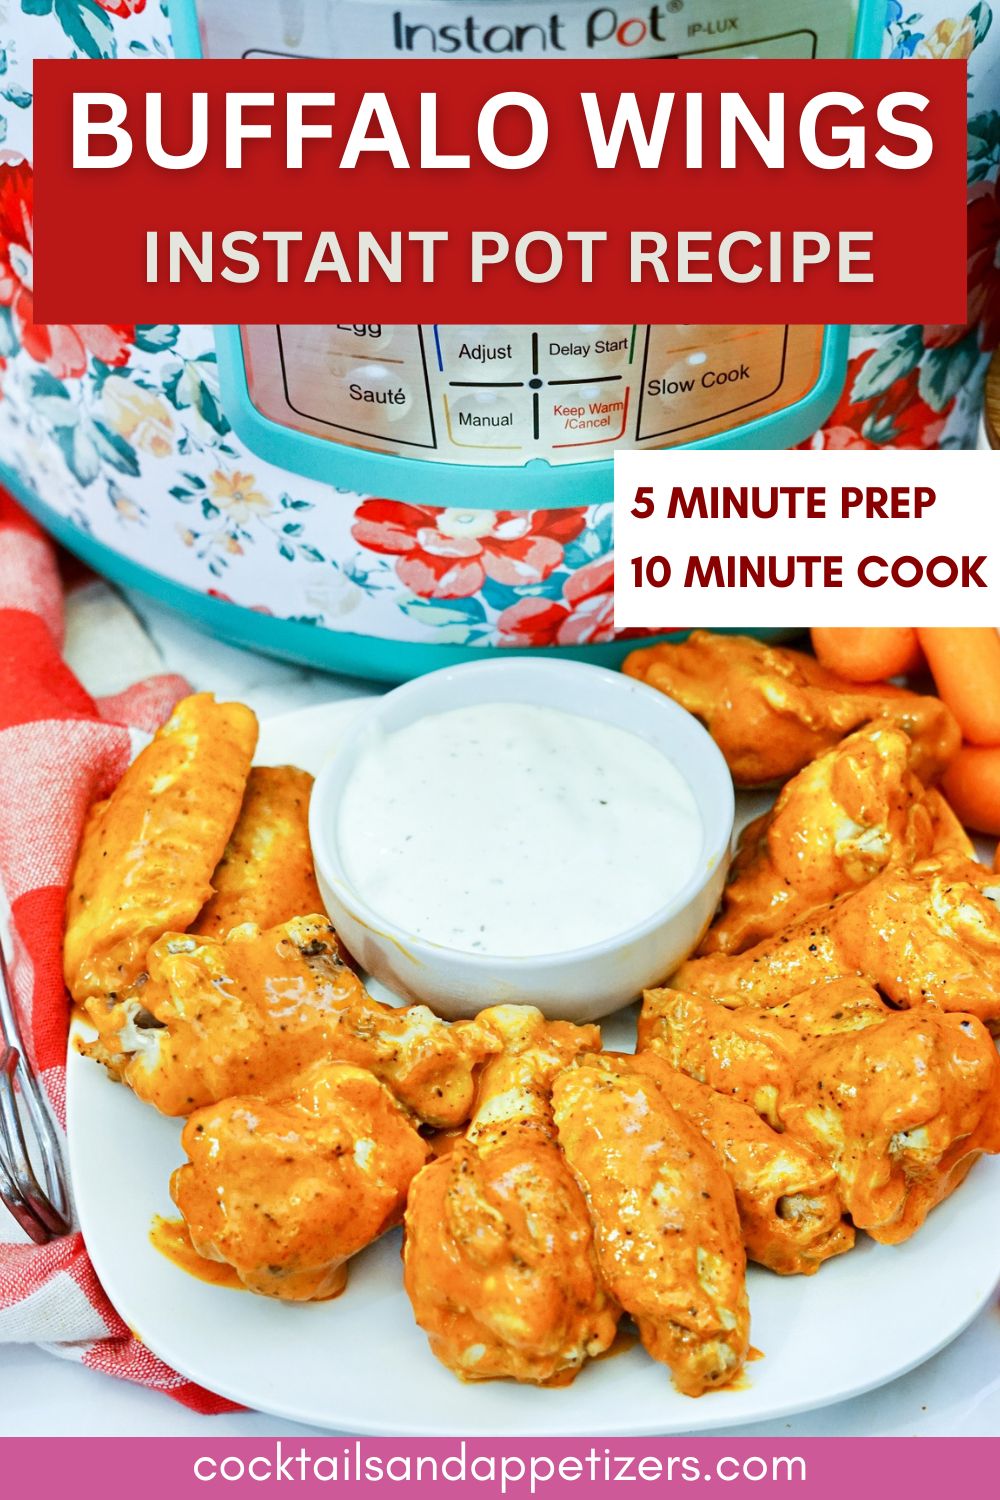 Buffalo Chicken Wings on a plate with ranch dipping sauce and Instant Pot in background.